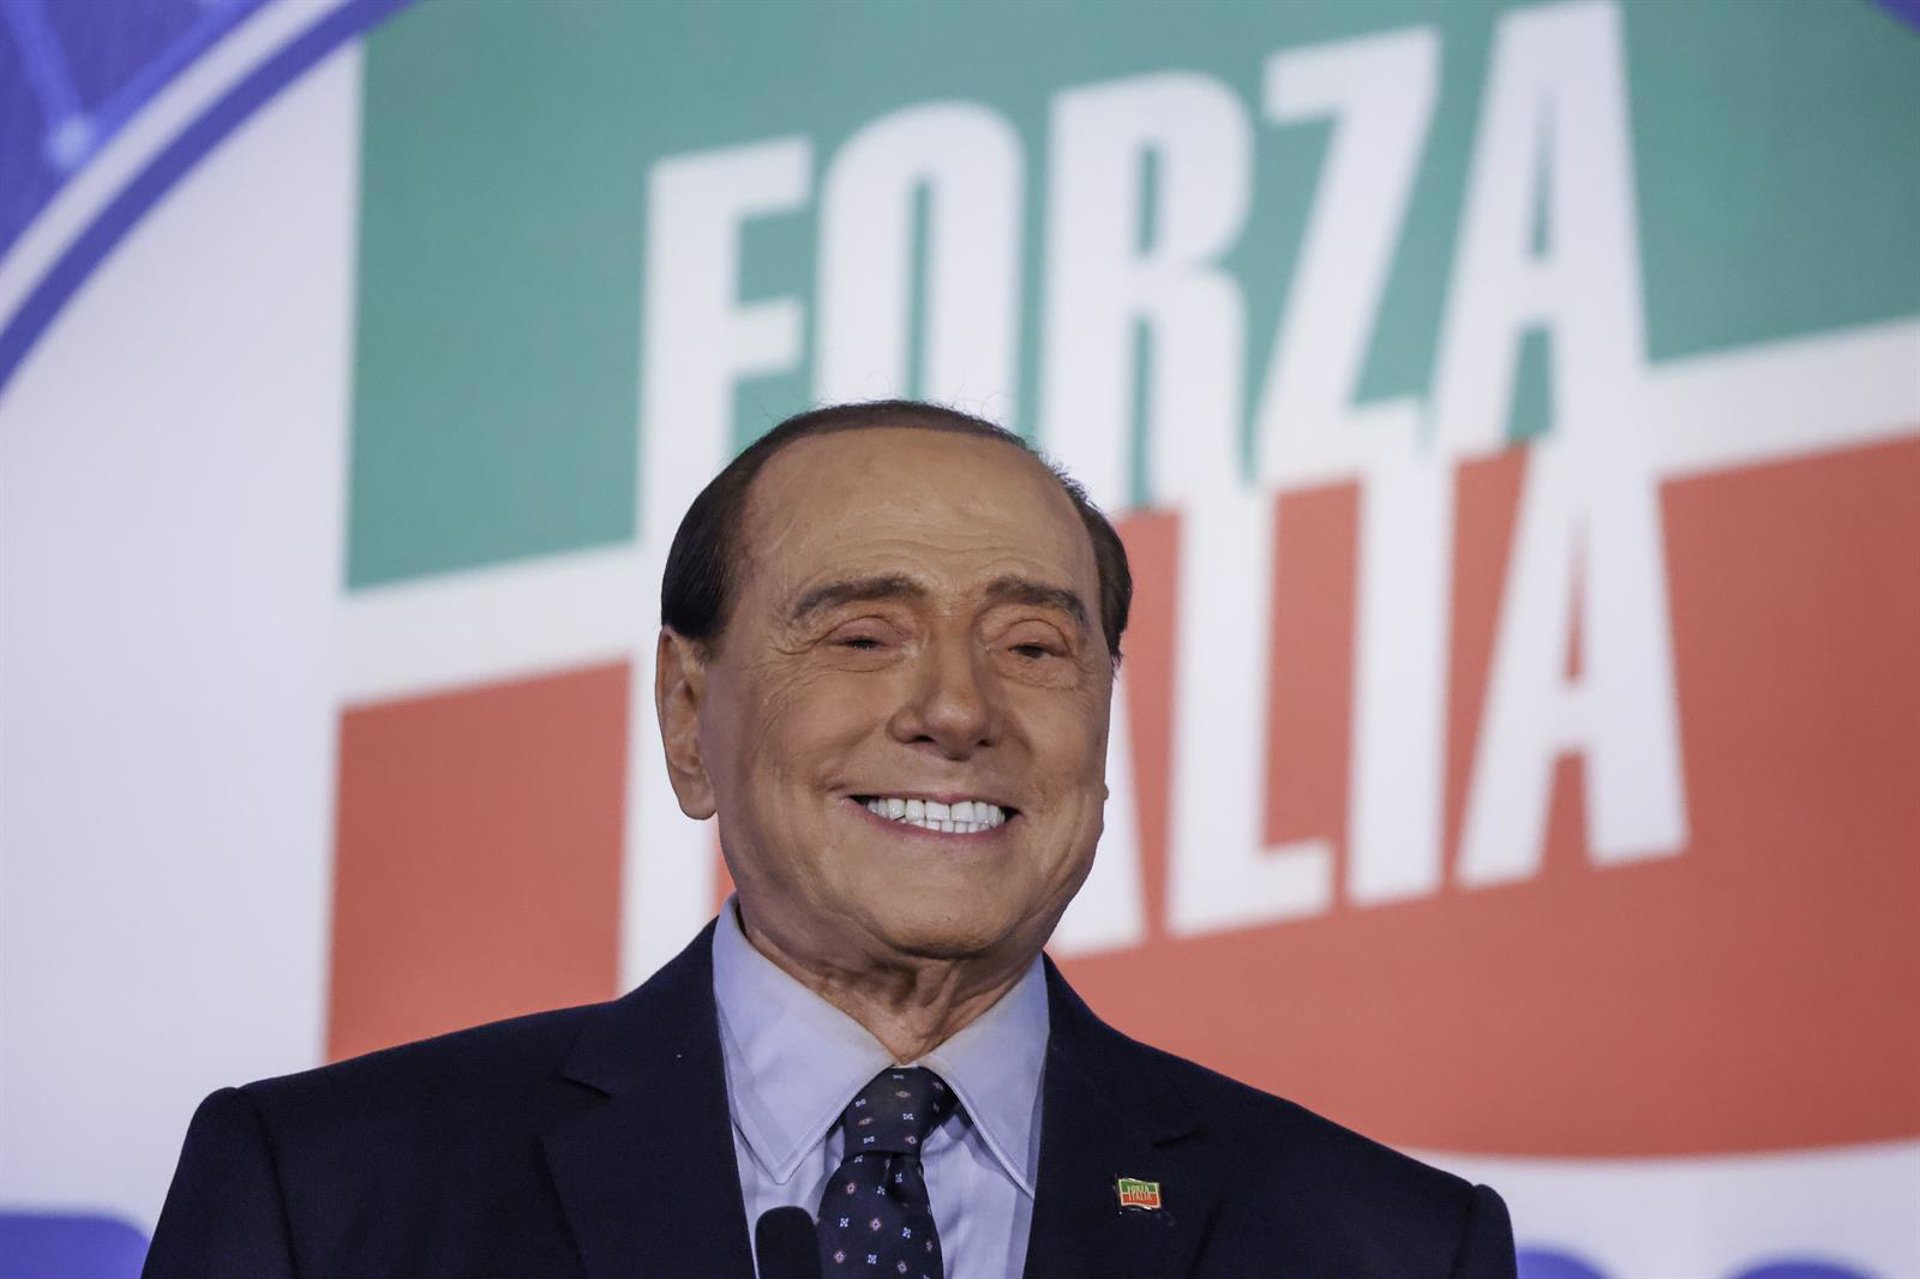 Berlusconi Eyes Political Resurrection, Unhindered By Sex